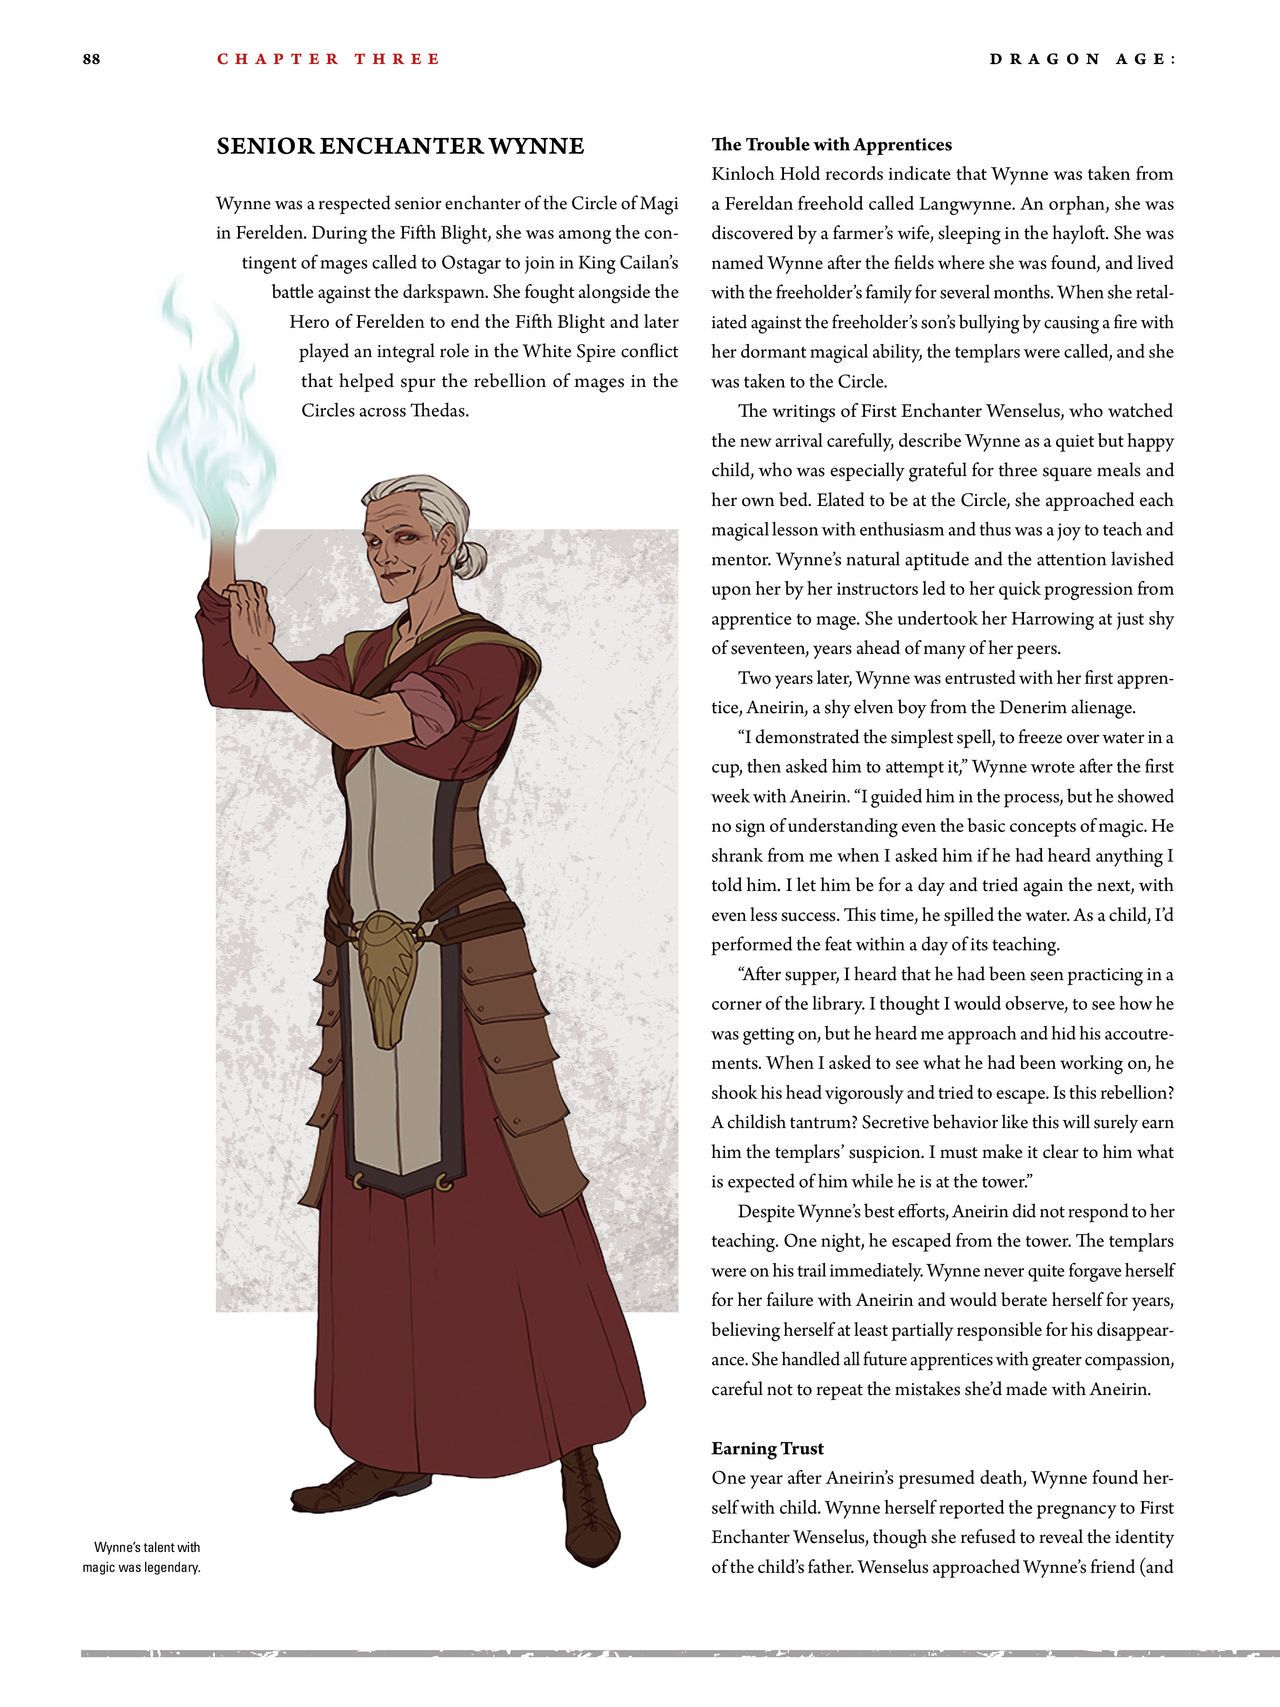 Dragon Age - The World of Thedas v02 84